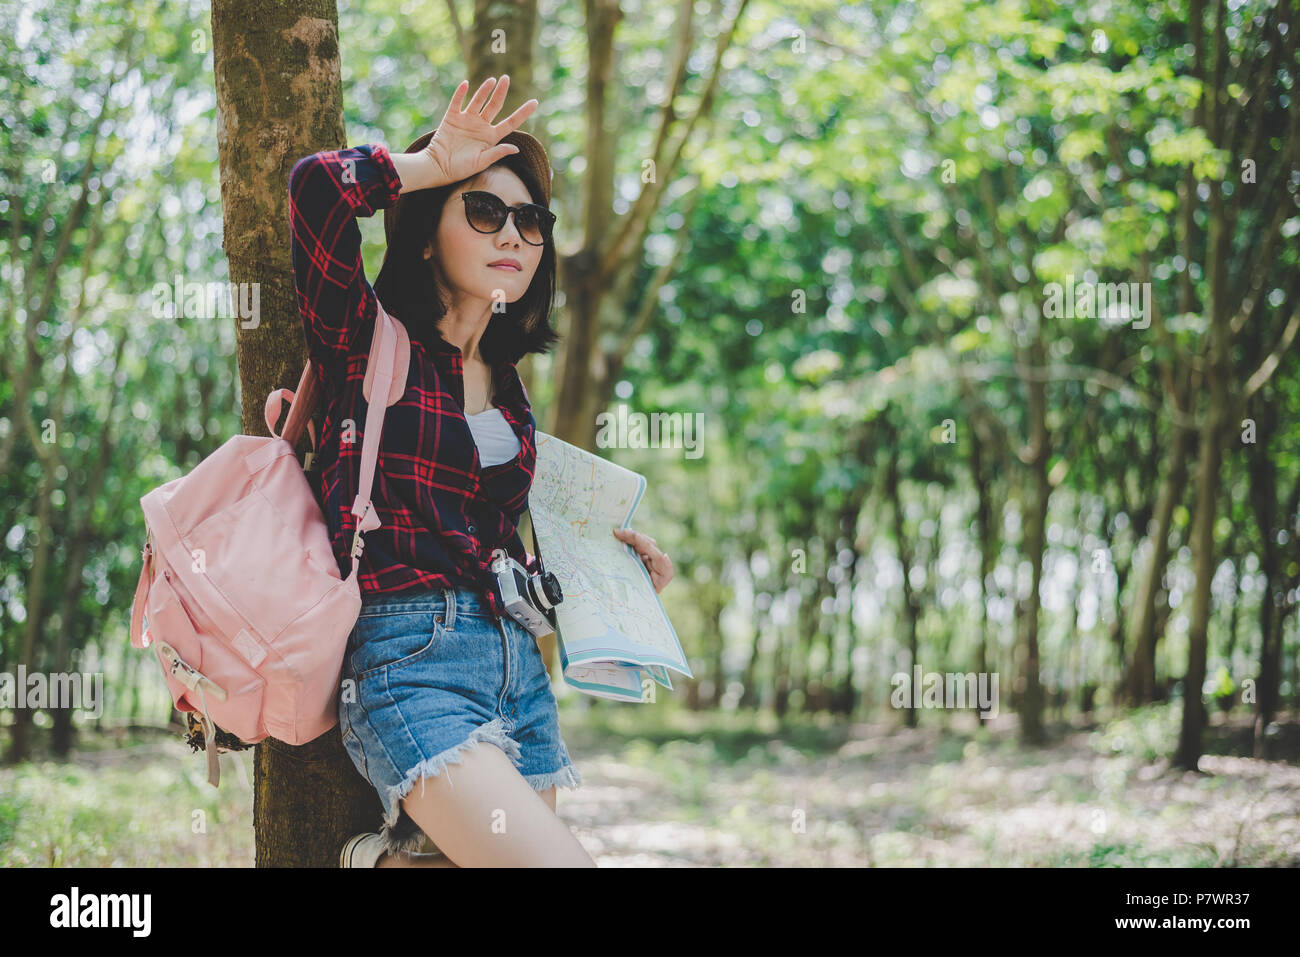 Asian female traveler tiring from lost her way in forest. Woman wiping sweat away  by hand. Solo girl traveling and Adventure concept. Portrait and Li Stock Photo